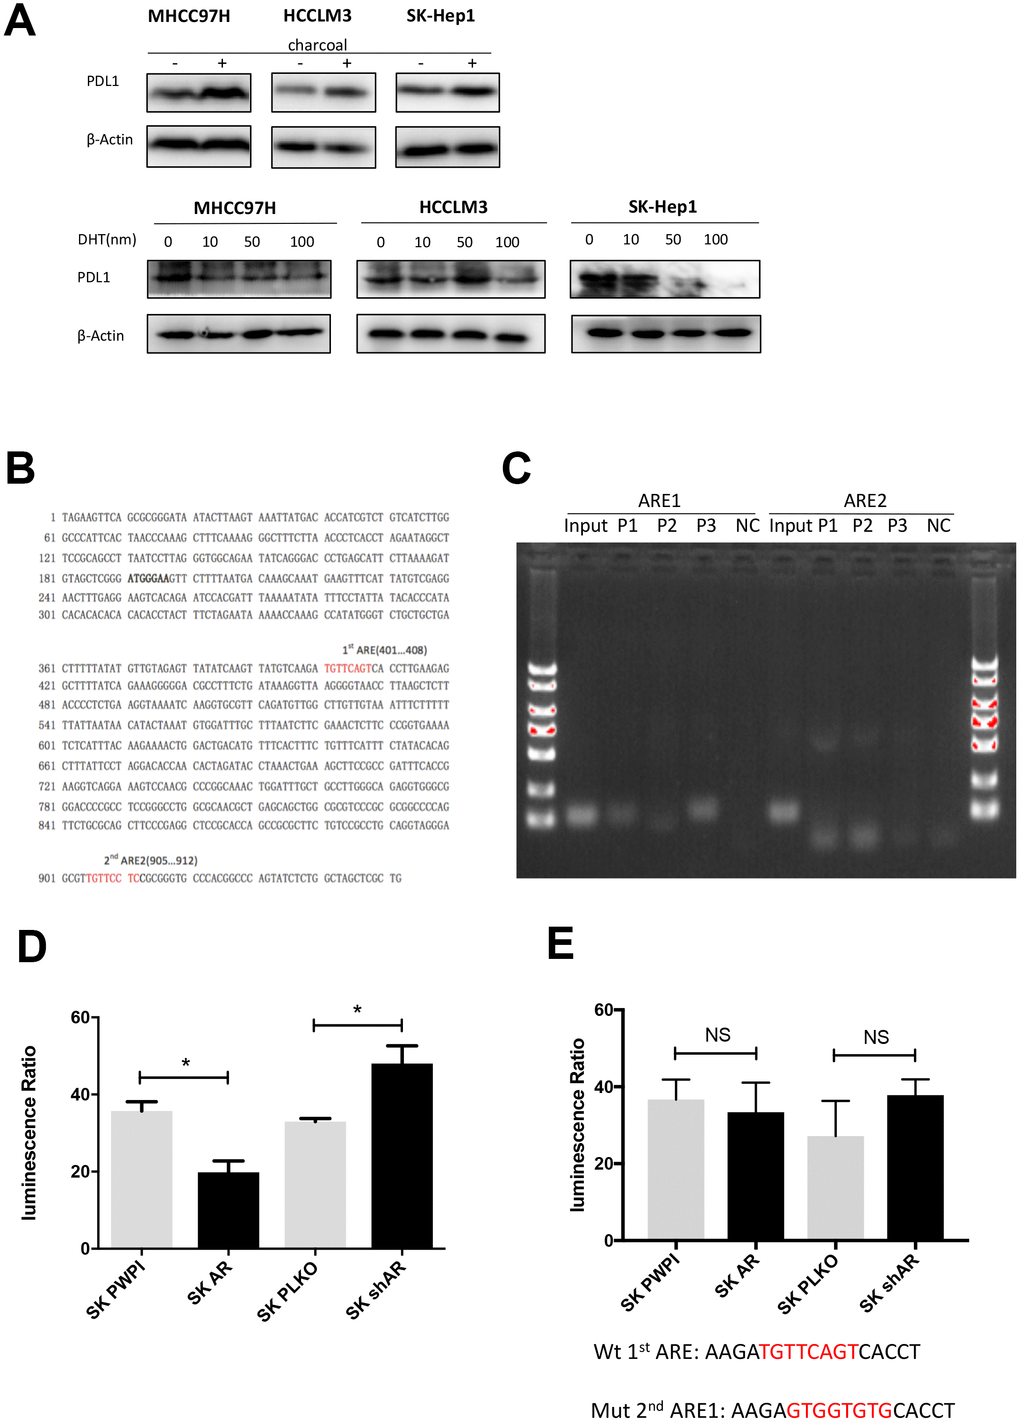 AR activates PD-L1 transcription by binding to its promoter region. (A) Castration assay was performed in three HCC cell lines. (B) Predicted localization of AREs in PD-L1 promoter region (red). (C) Chromatin immunoprecipitation was performed in wild-type SK-Hep1 cells. The detecting primer was designed based on the prediction result of potential AREs. (D) Wild-type PD-L1 promoter construct was transfected into SK-Hep1 cells with internal control pRL-TK. Then, we performed luciferase reporter assays with manipulated AR to detect if AR could affect activation of PD-L1 promoter. (E) Luciferase reporter assays were performed after transfecting mutated 1st ARE into AR-overexpressed SK-Hep1 cells and AR knocked-down SK-Hep1 cells. *PPP